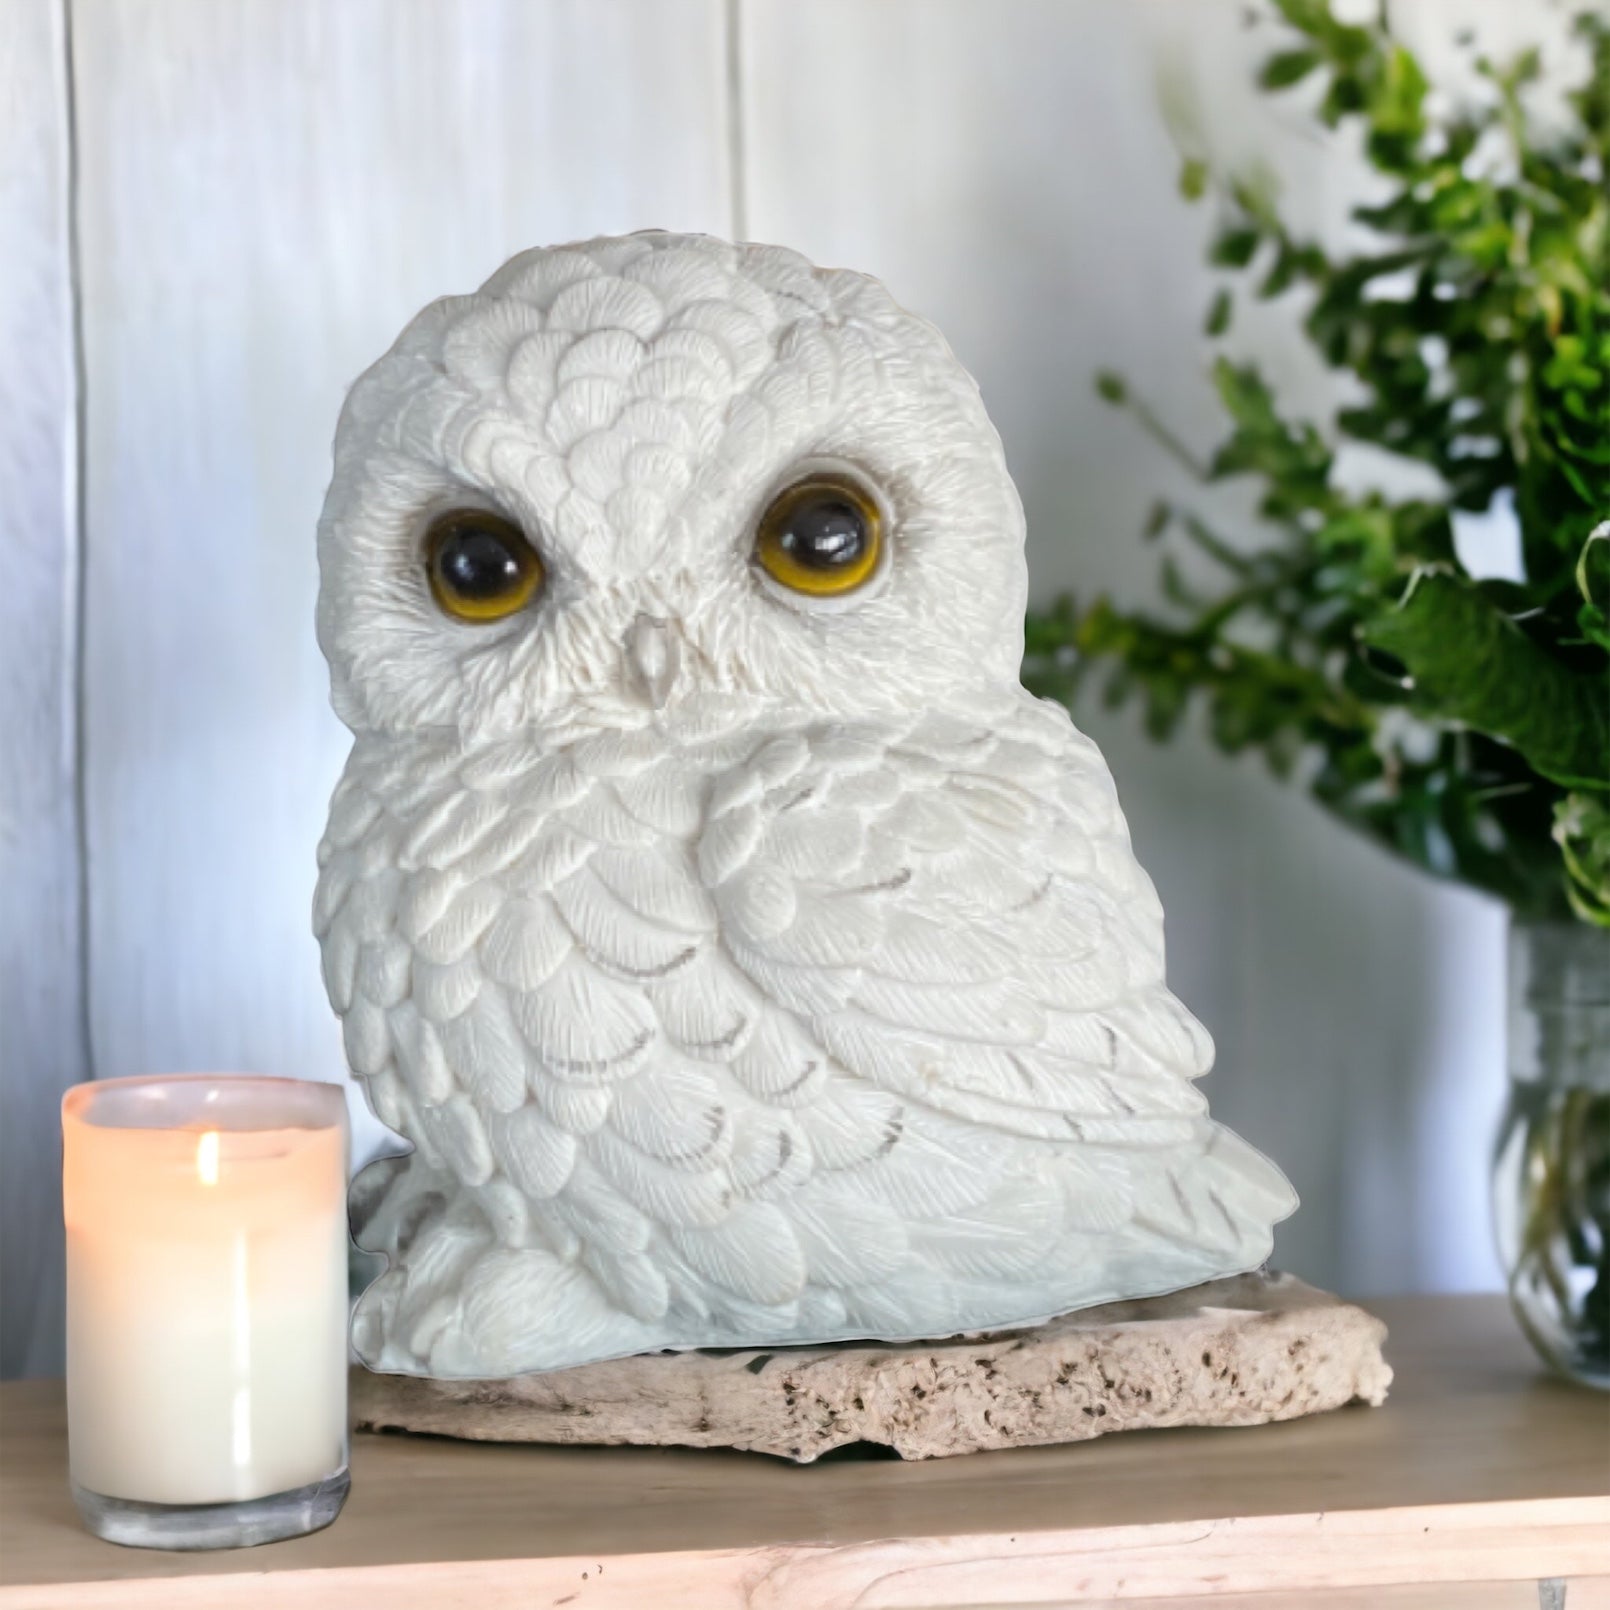 Owl Realistic Bird Ornament White - The Renmy Store Homewares & Gifts 